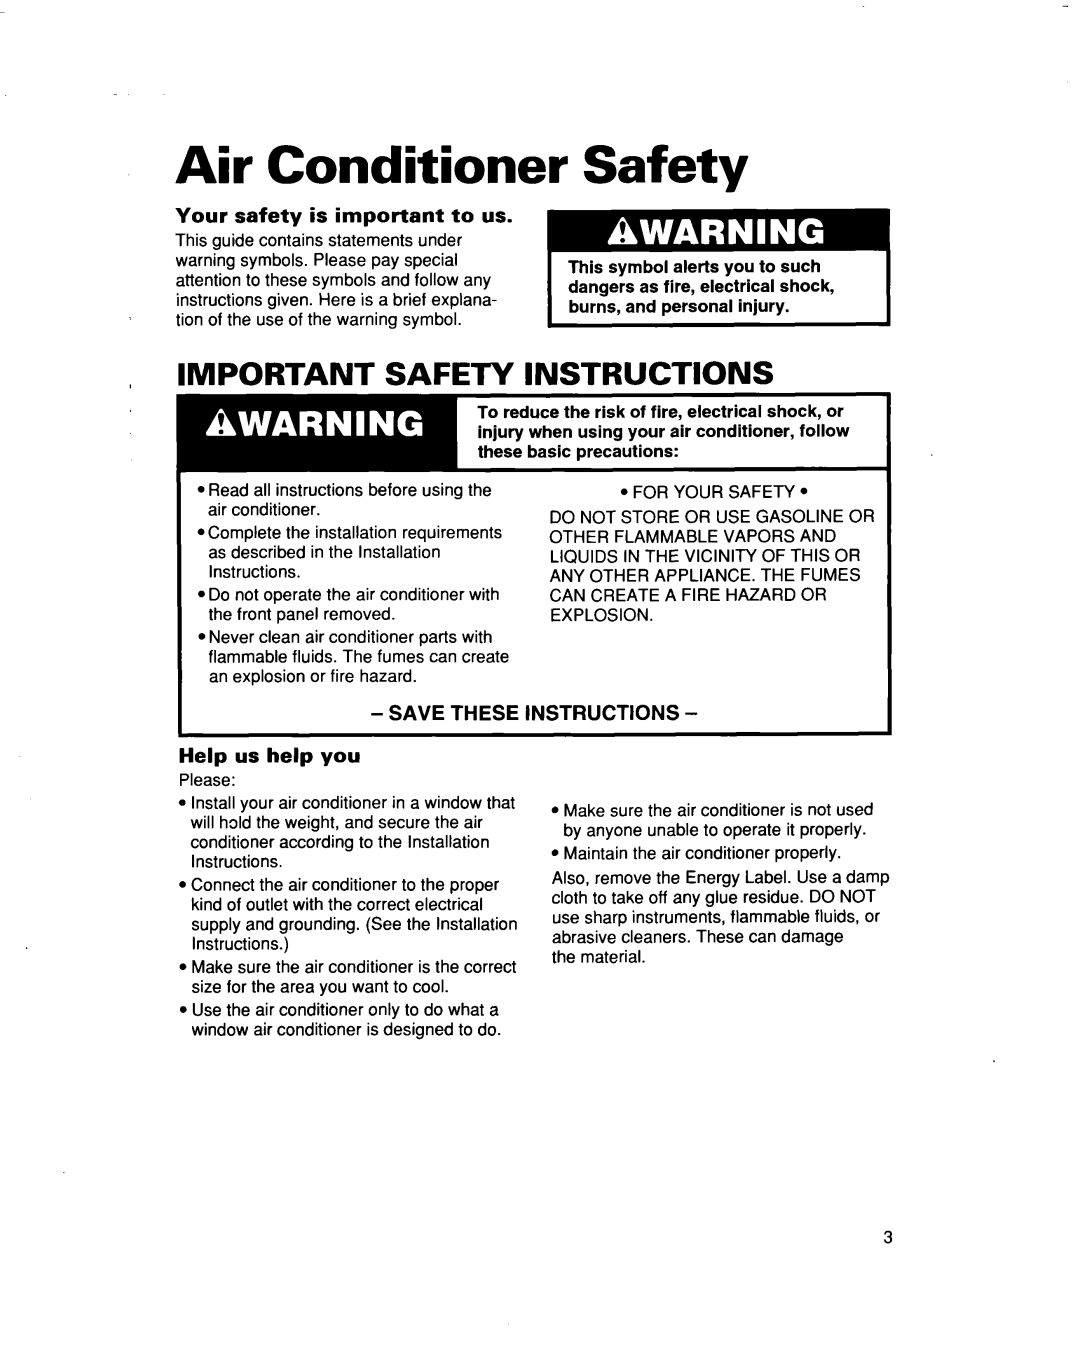 Whirlpool AR1200, AR1000 warranty Air Conditioner, Important Safety Instructions, Your safety is important to us 